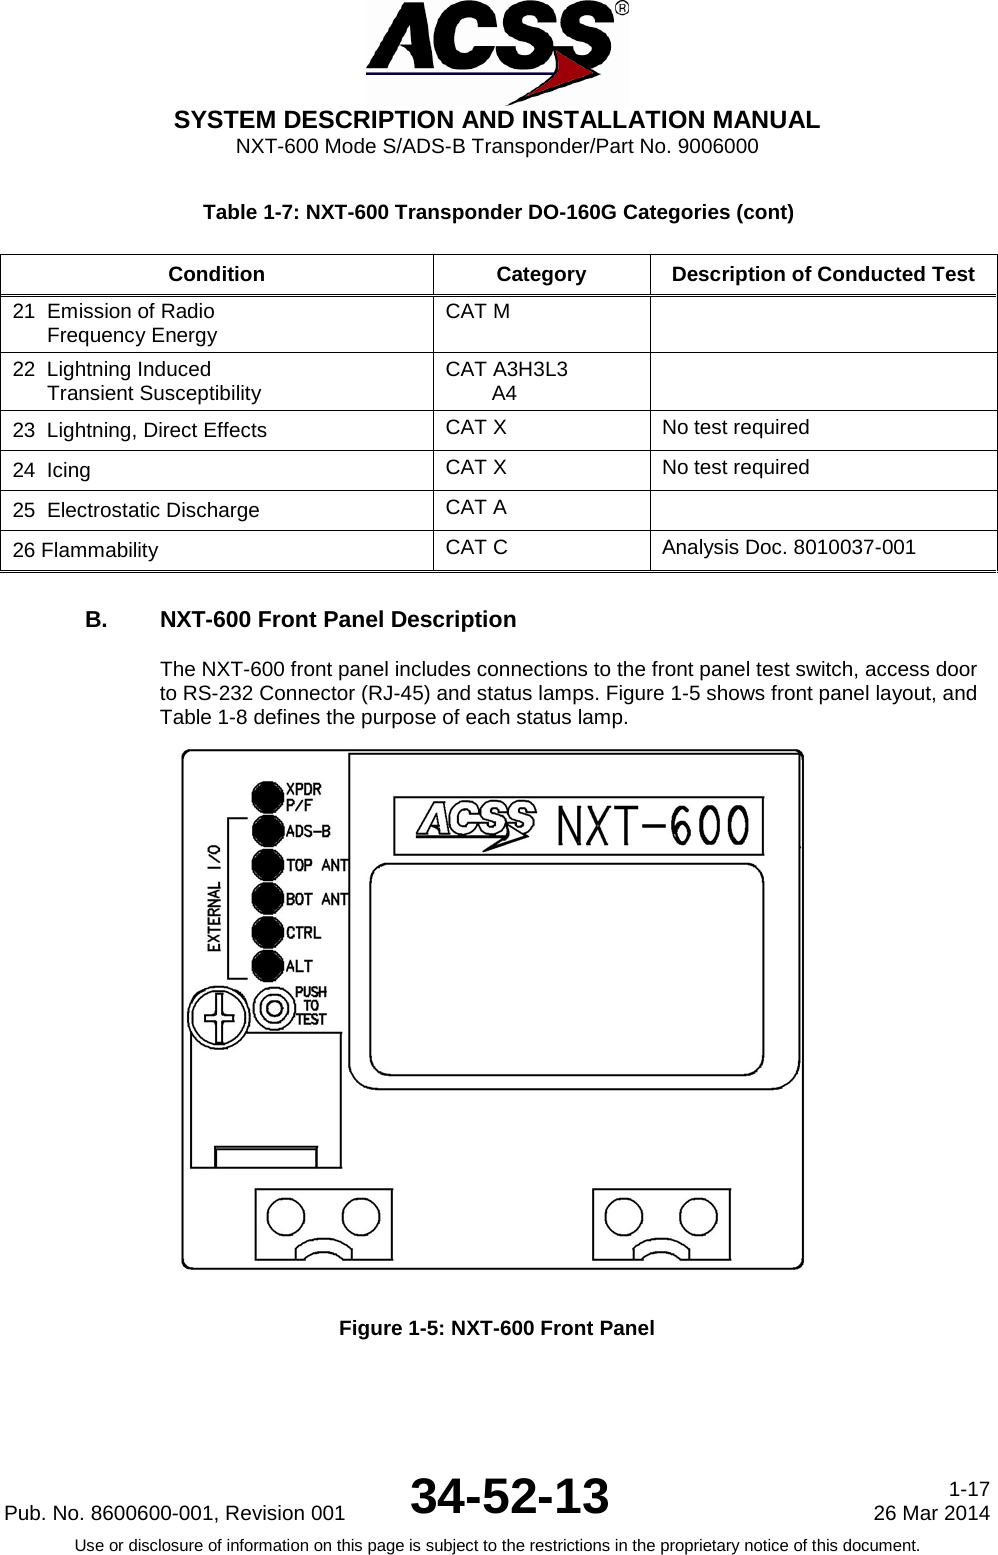  SYSTEM DESCRIPTION AND INSTALLATION MANUAL NXT-600 Mode S/ADS-B Transponder/Part No. 9006000 Table 1-7: NXT-600 Transponder DO-160G Categories (cont) Condition Category Description of Conducted Test 21  Emission of Radio         Frequency Energy       CAT M  22  Lightning Induced       Transient Susceptibility        CAT A3H3L3         A4  23  Lightning, Direct Effects CAT X No test required 24  Icing CAT X No test required 25  Electrostatic Discharge CAT A  26 Flammability CAT C Analysis Doc. 8010037-001 B. NXT-600 Front Panel Description The NXT-600 front panel includes connections to the front panel test switch, access door to RS-232 Connector (RJ-45) and status lamps. Figure 1-5 shows front panel layout, and Table 1-8 defines the purpose of each status lamp.  Figure 1-5: NXT-600 Front Panel Pub. No. 8600600-001, Revision 001 34-52-13 1-17 26 Mar 2014 Use or disclosure of information on this page is subject to the restrictions in the proprietary notice of this document.     